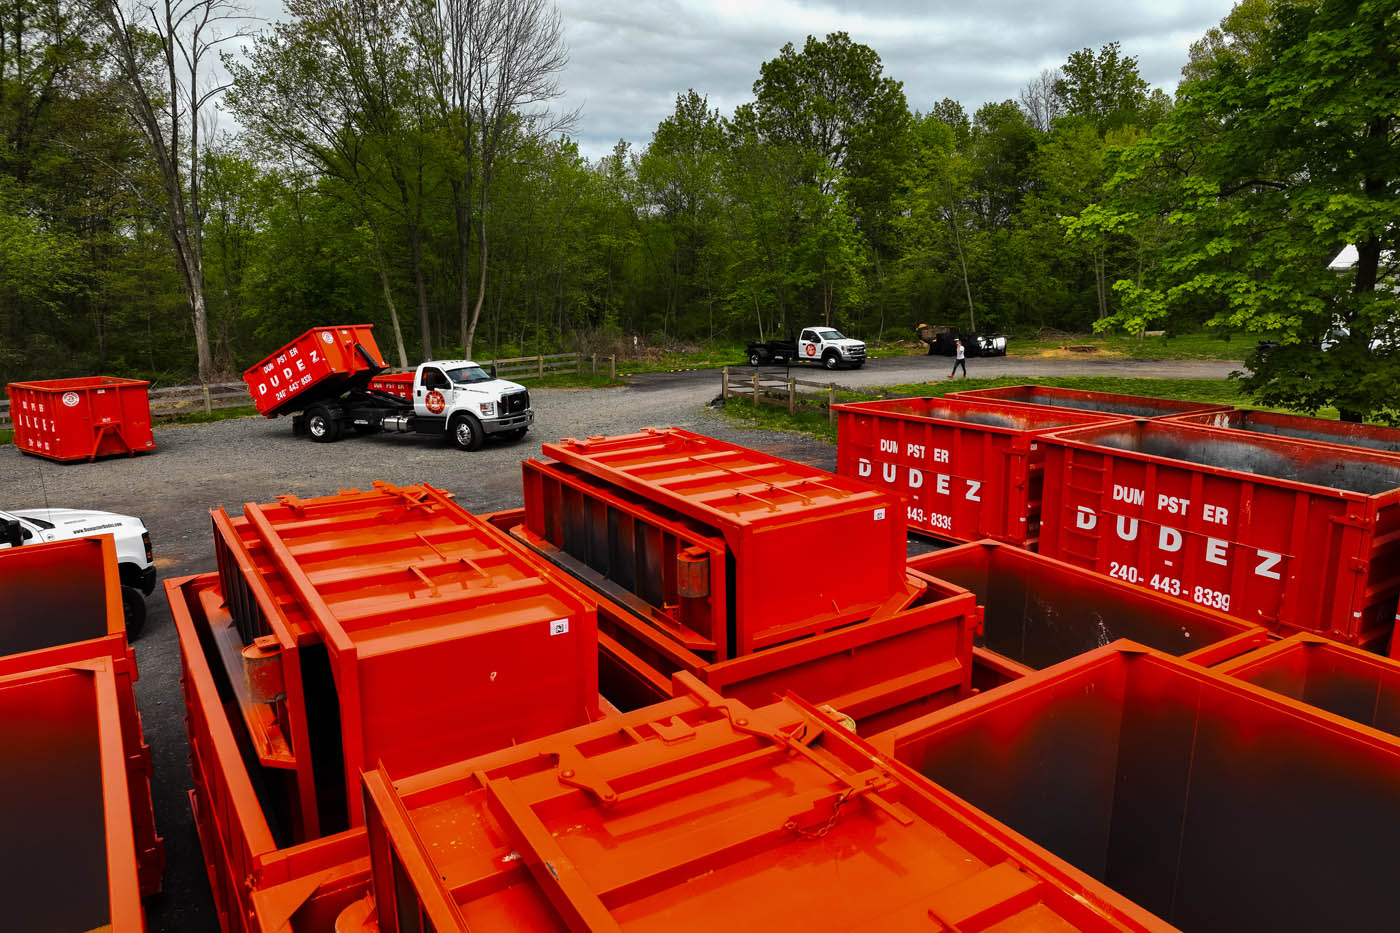 
				Dumpster Dudez trucks and storage lot for some of the best dumpster rental prices in Fayetteville–Springdale–Rogers, AR. 
			